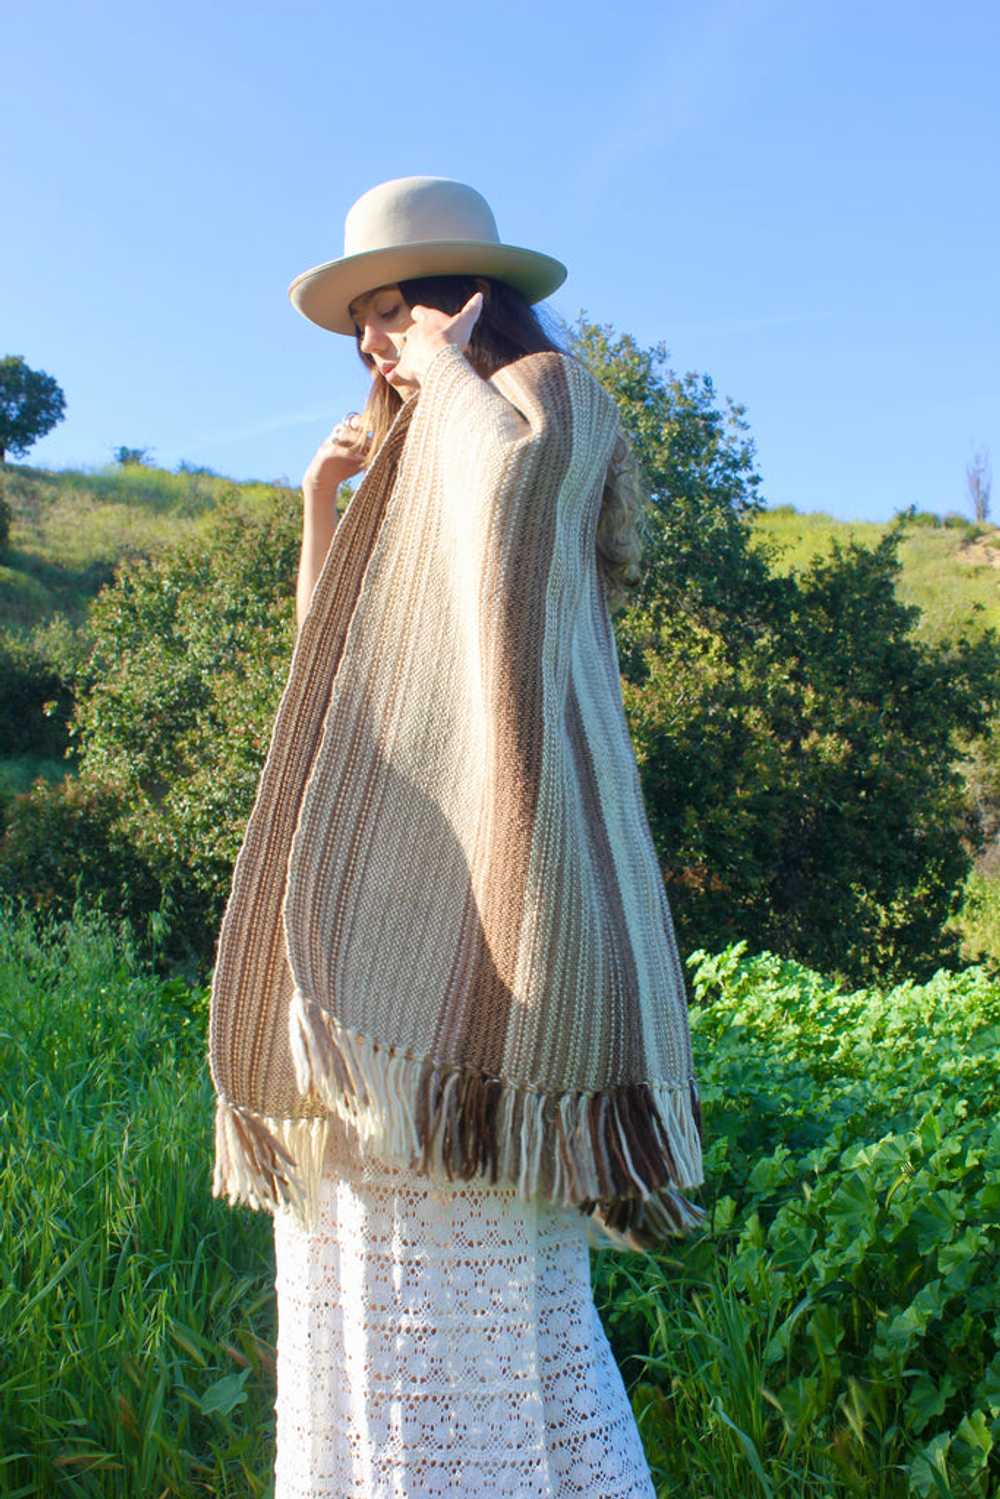 Terra Mills Handwoven Wool Shawl Wrap New Mexico - image 3